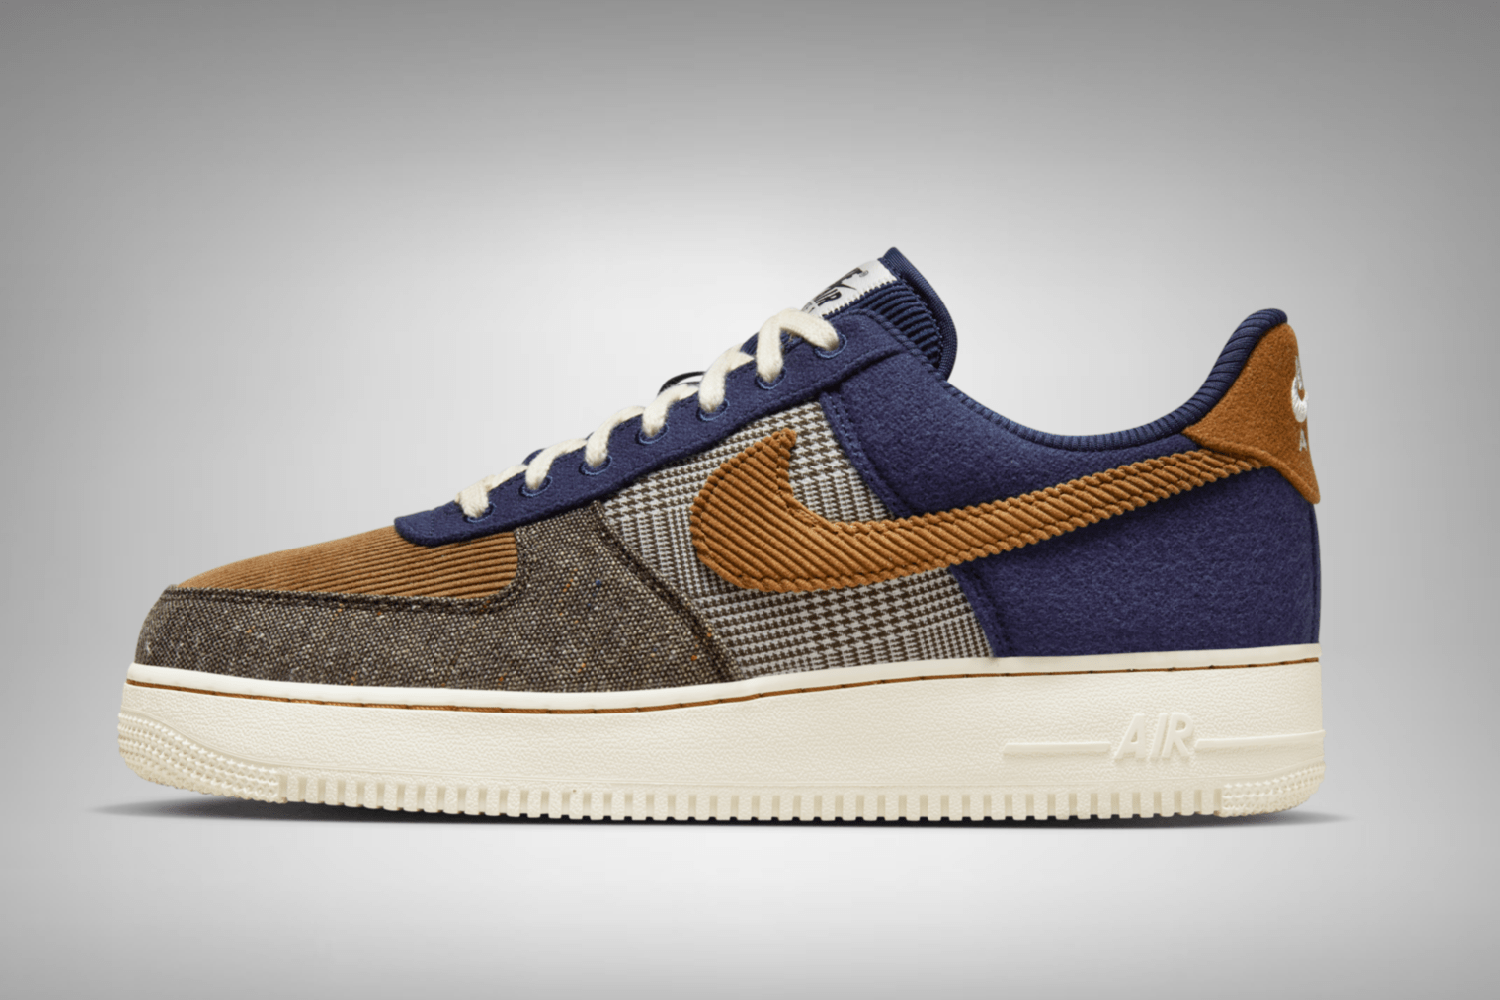 The Nike Air Force 1 Low comes in a combination of tweed and corduroy